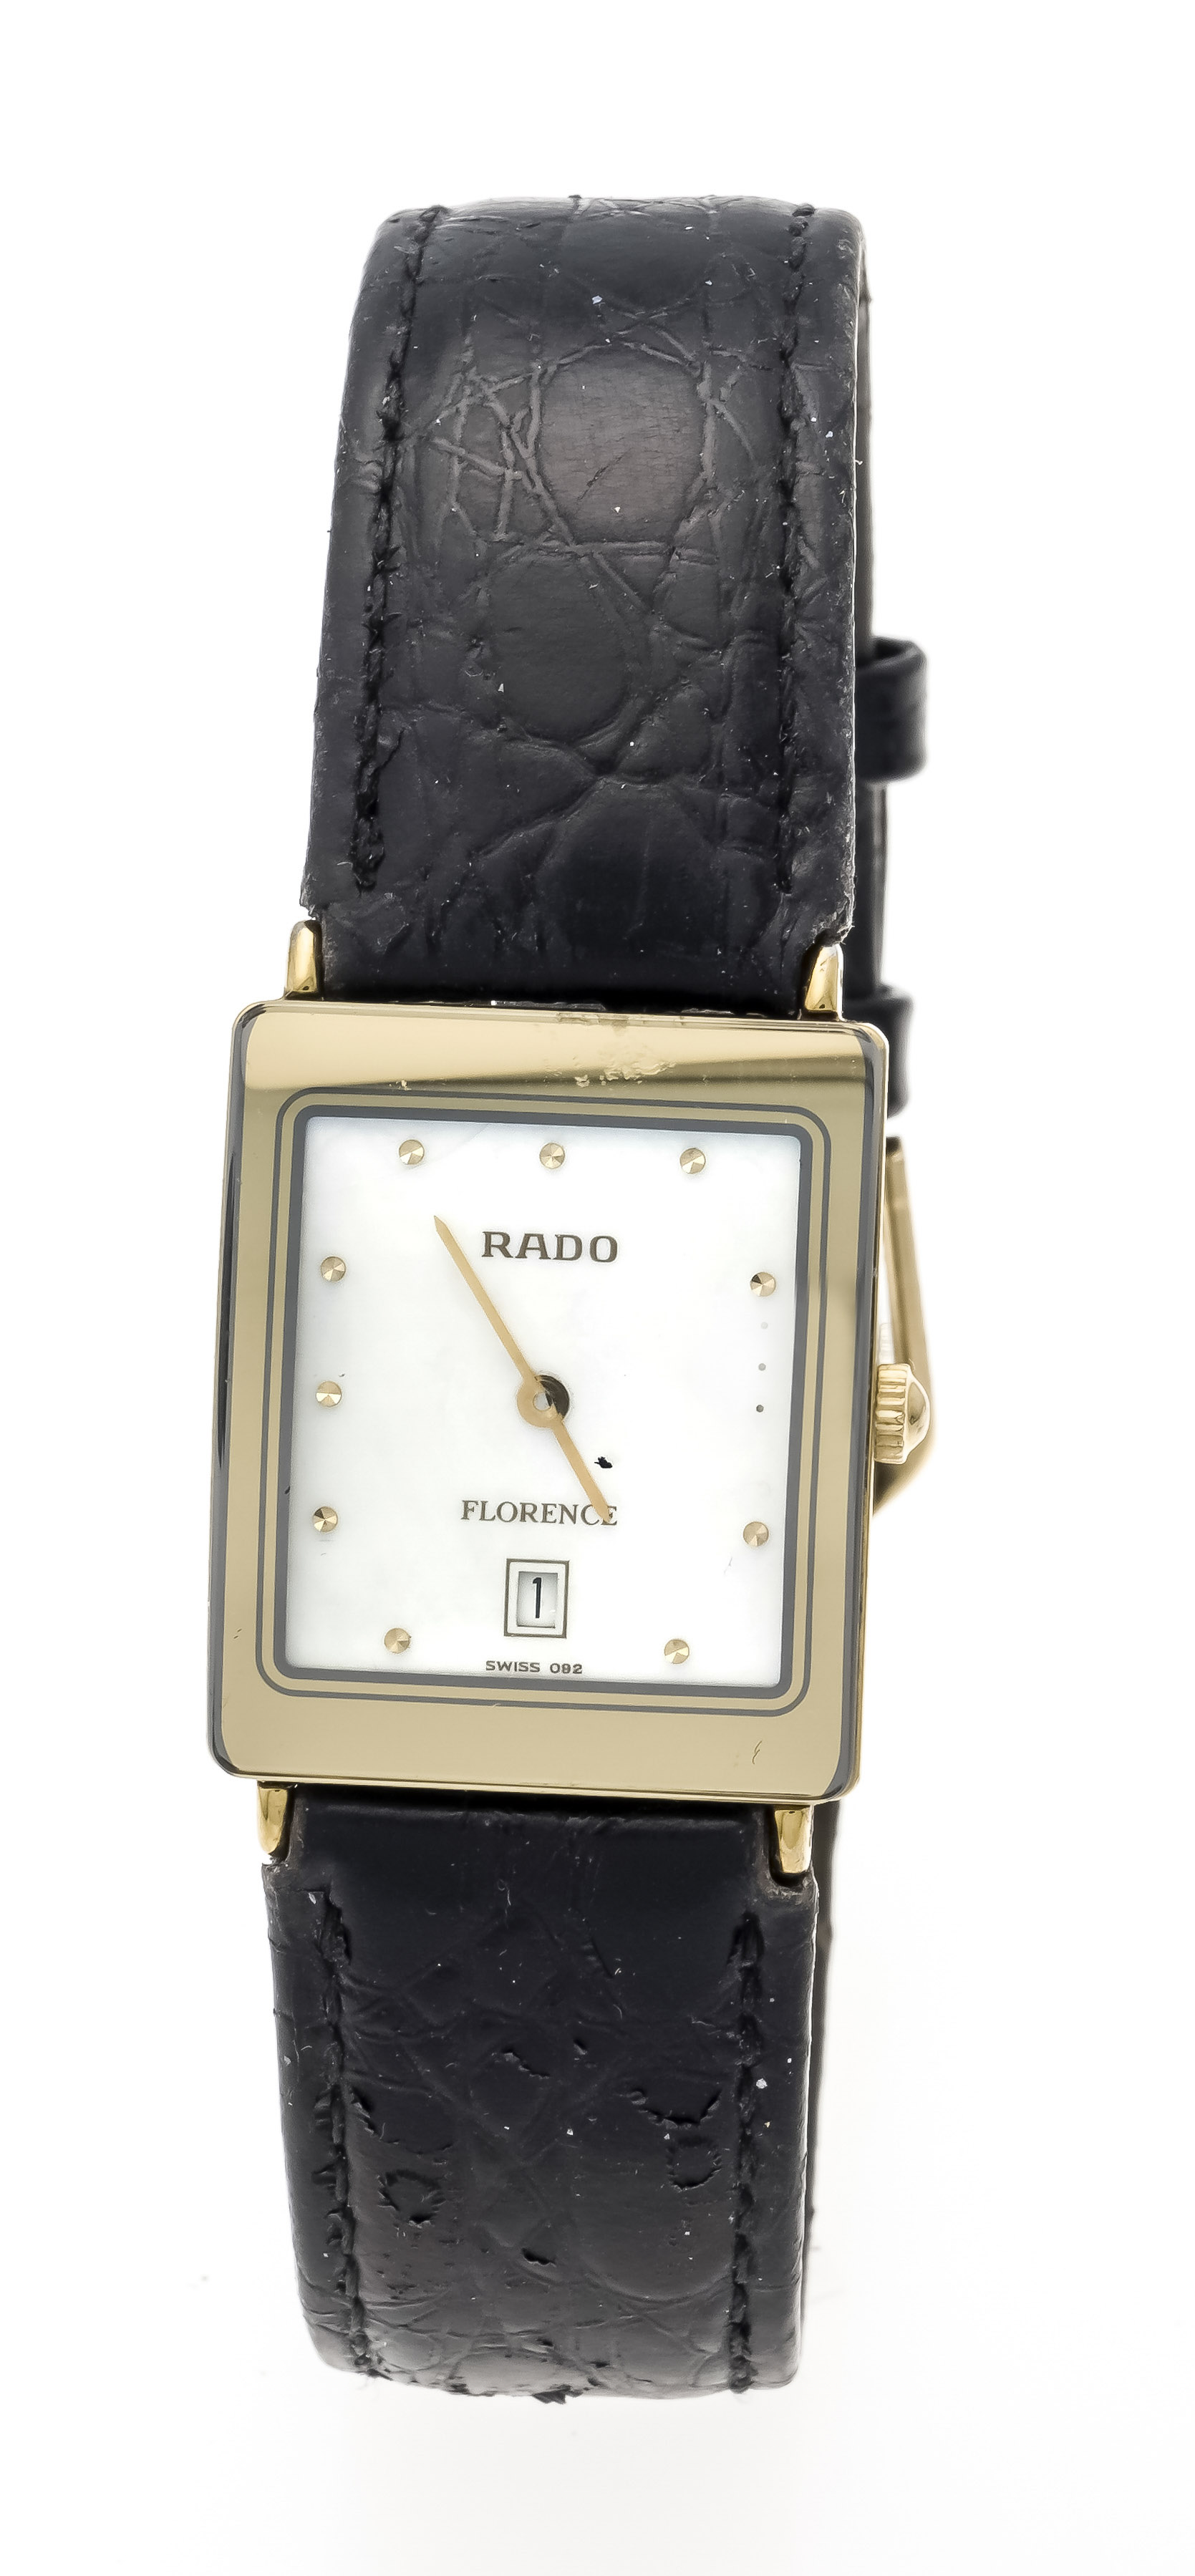 RADO Florence ladies' quartz watch, Ref. 160.3605.2N, gold-plated case with domed mirrored